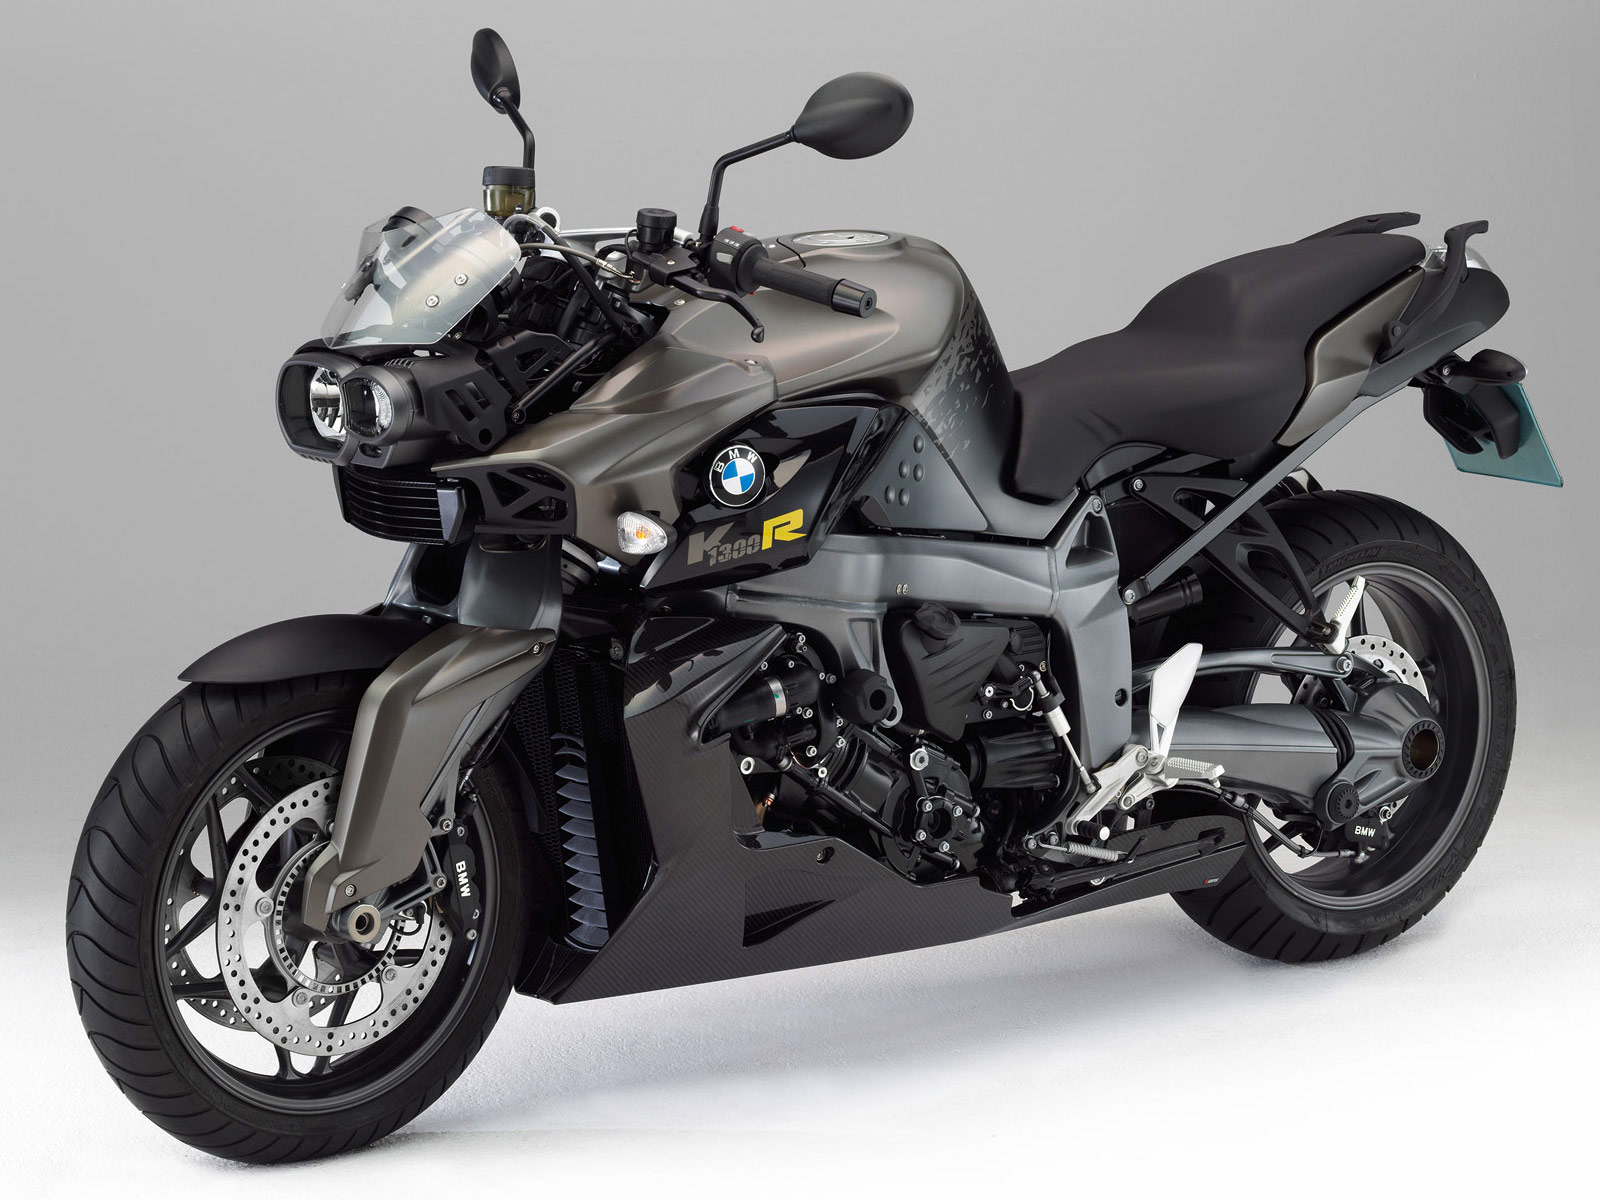 2012 BMW K1300R desktop wallpapers, specifications, review